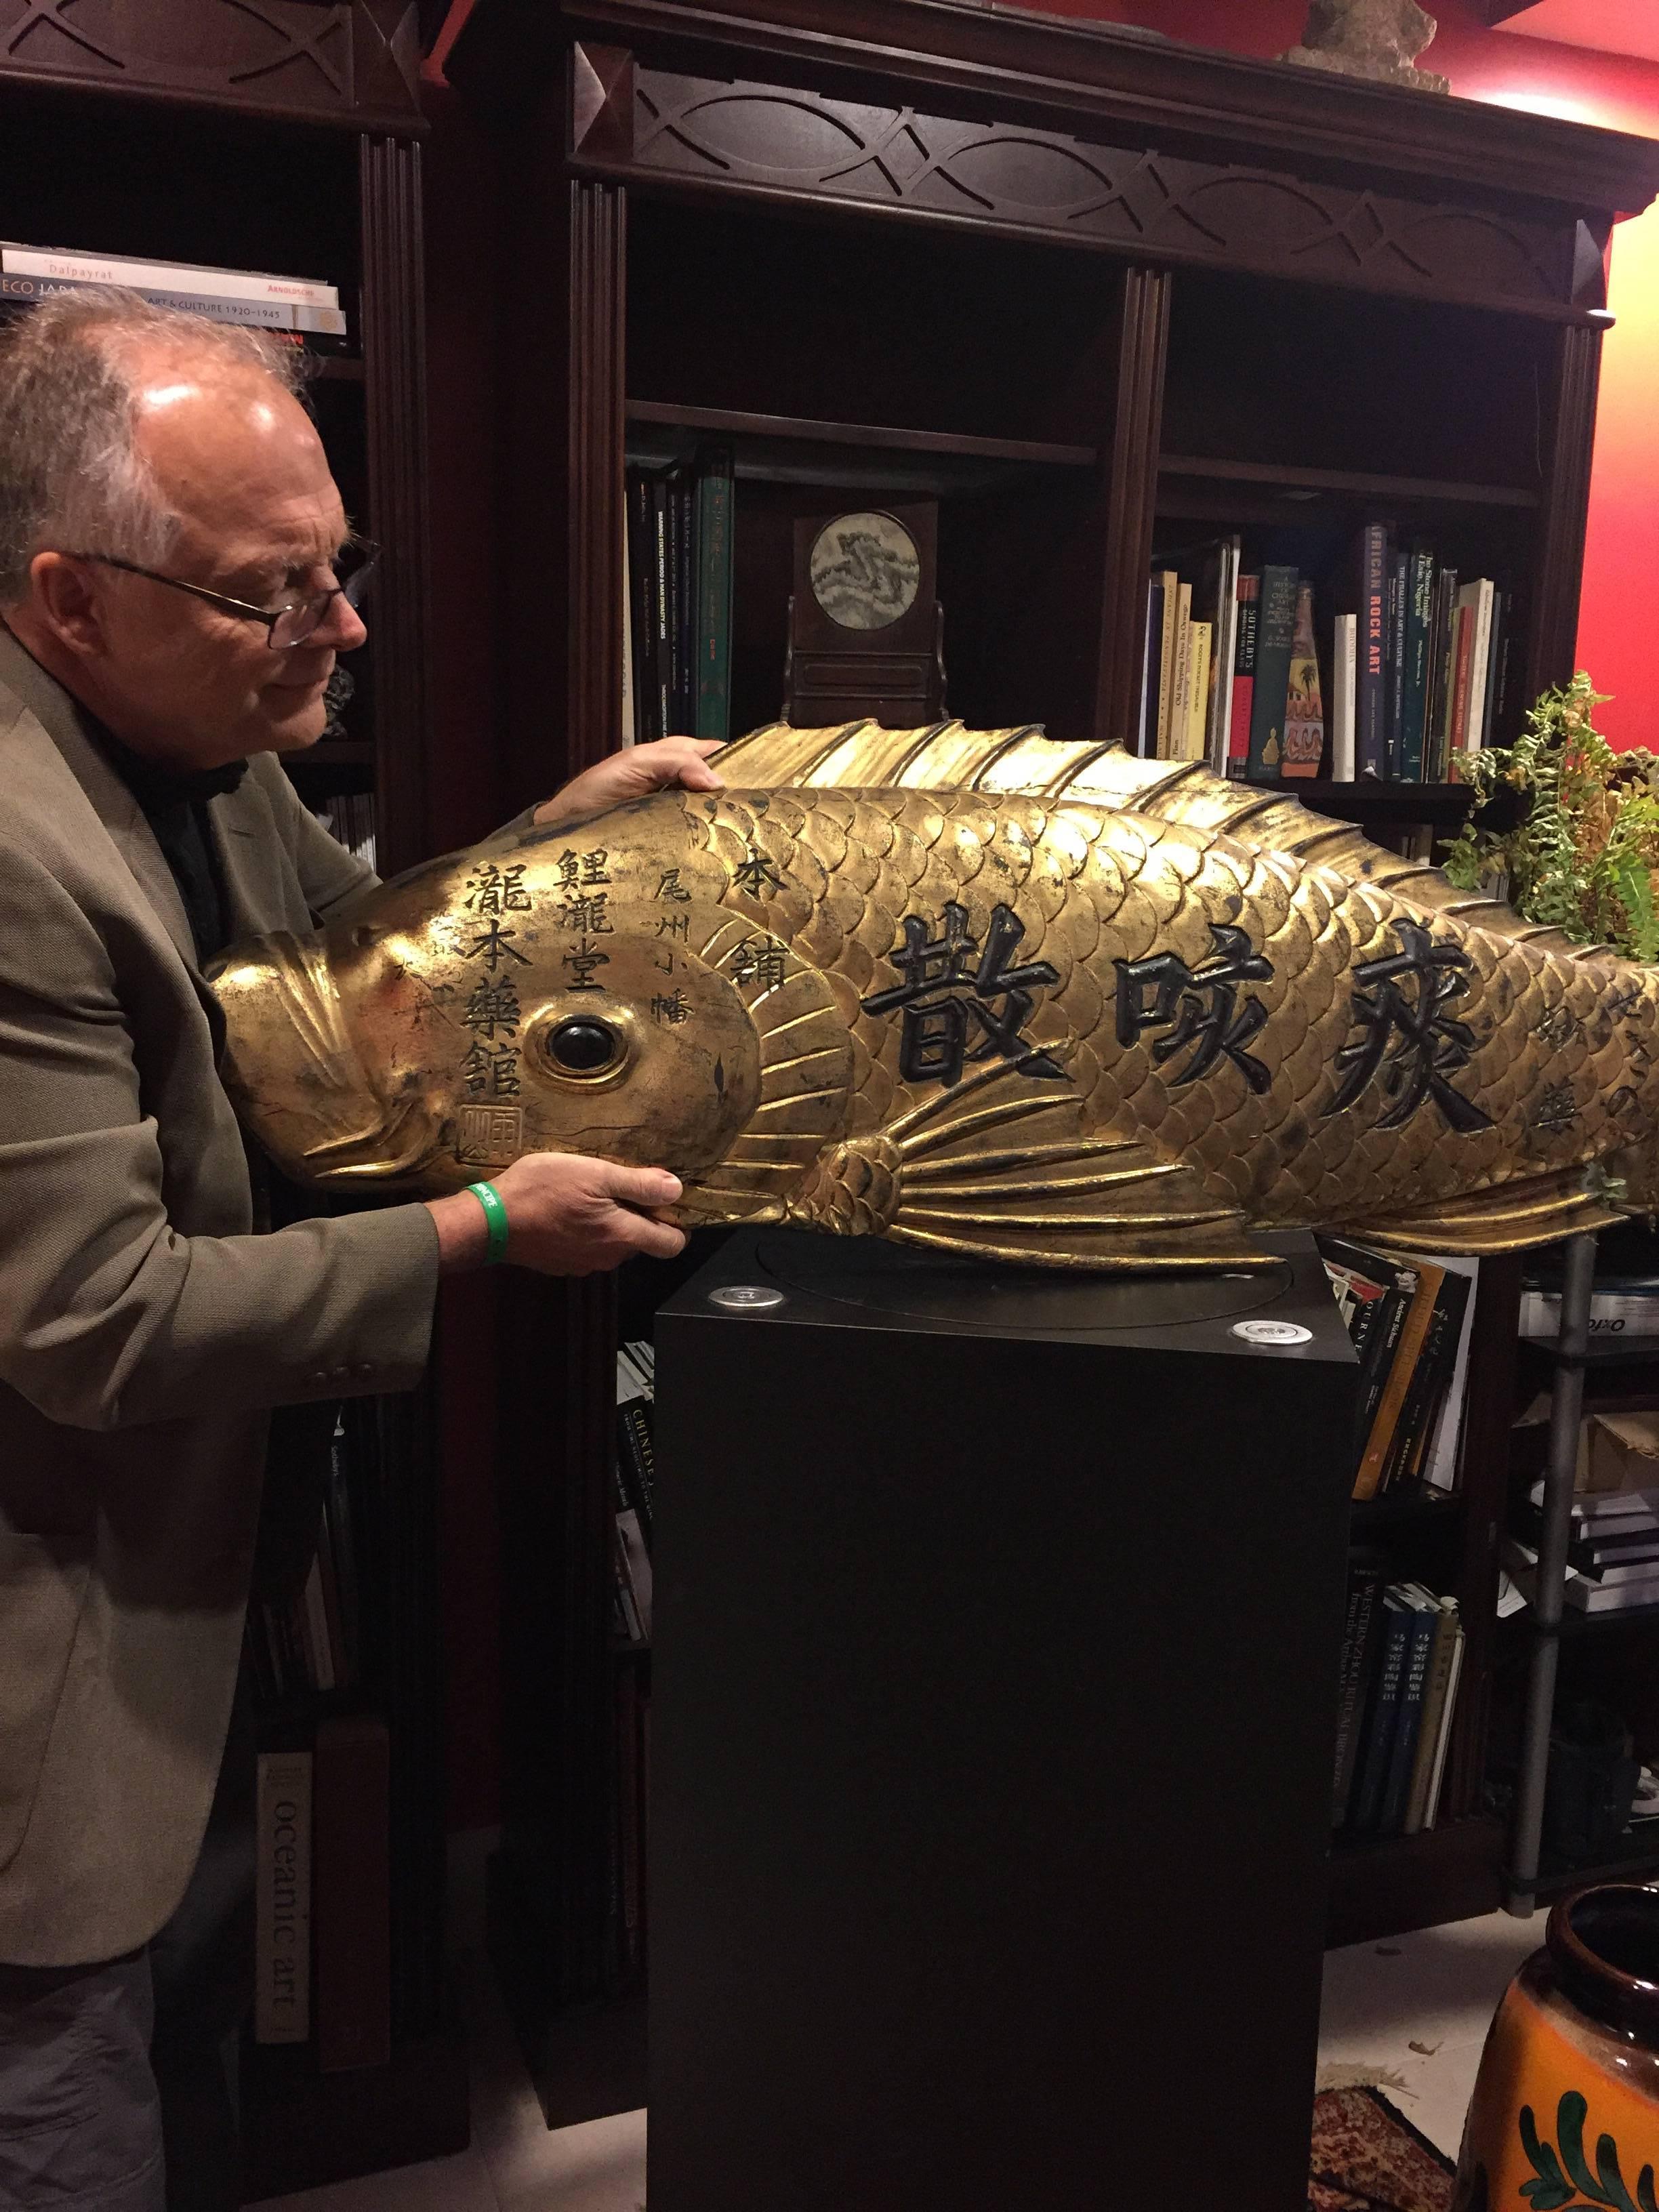 Japan, a superb hand made. hand carved, and hand gilded monumental antique gold gilt and lacquered sign kanban in the form of a Koi fish, 16” high and 56” long, Meiji period (1868-1912).

The carved Japanese zelcova (keyaki) wood and gold gilded